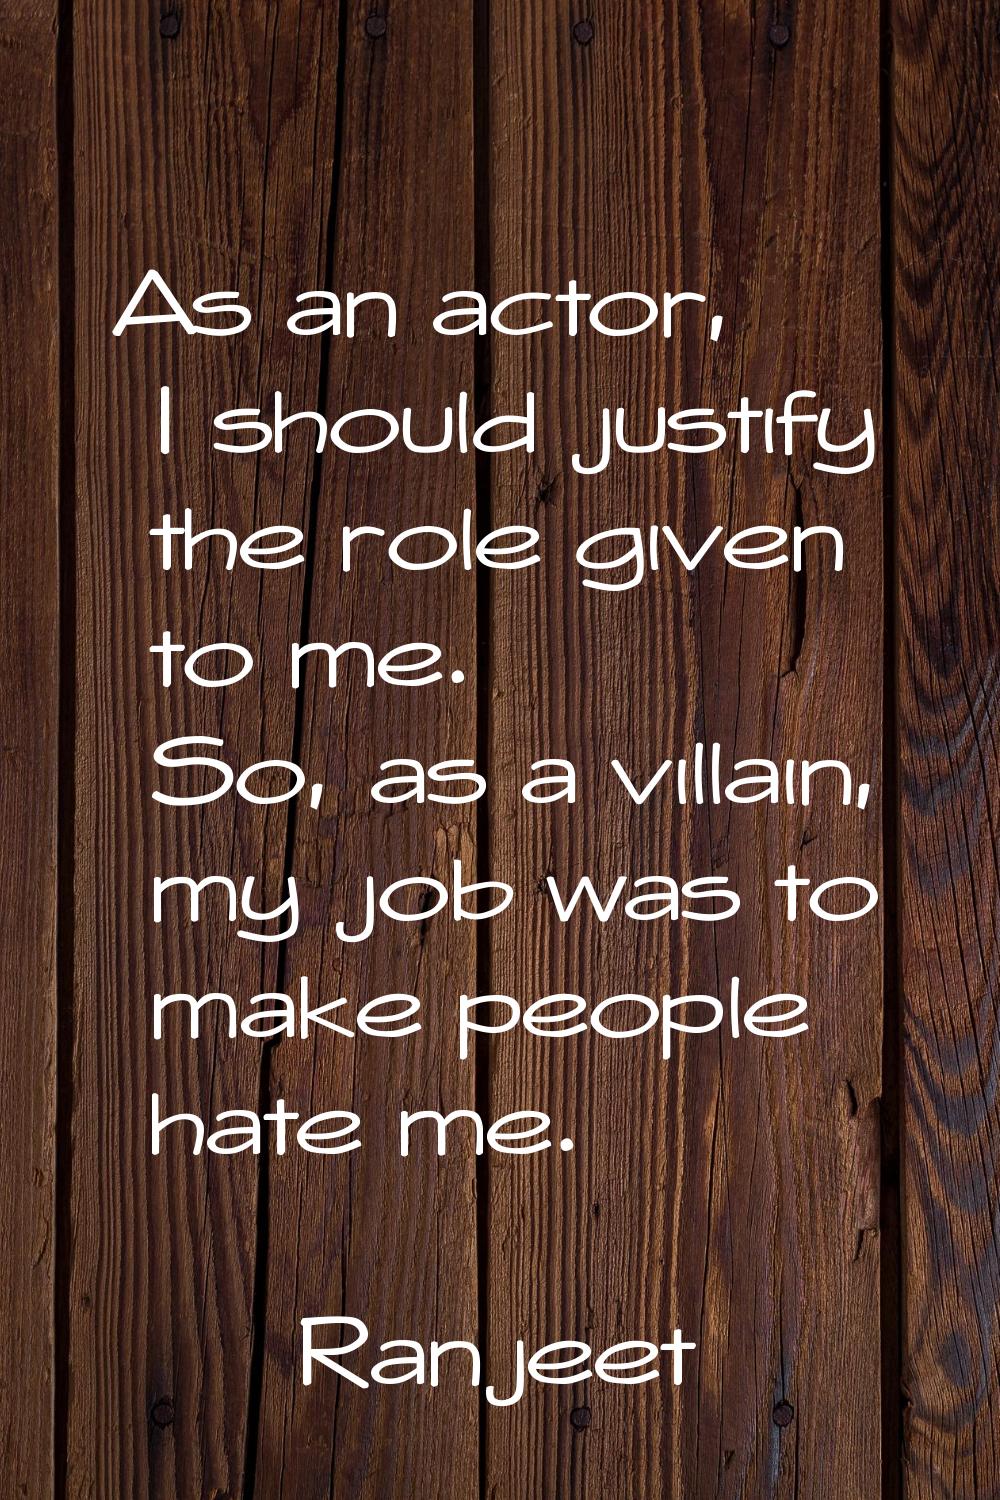 As an actor, I should justify the role given to me. So, as a villain, my job was to make people hat